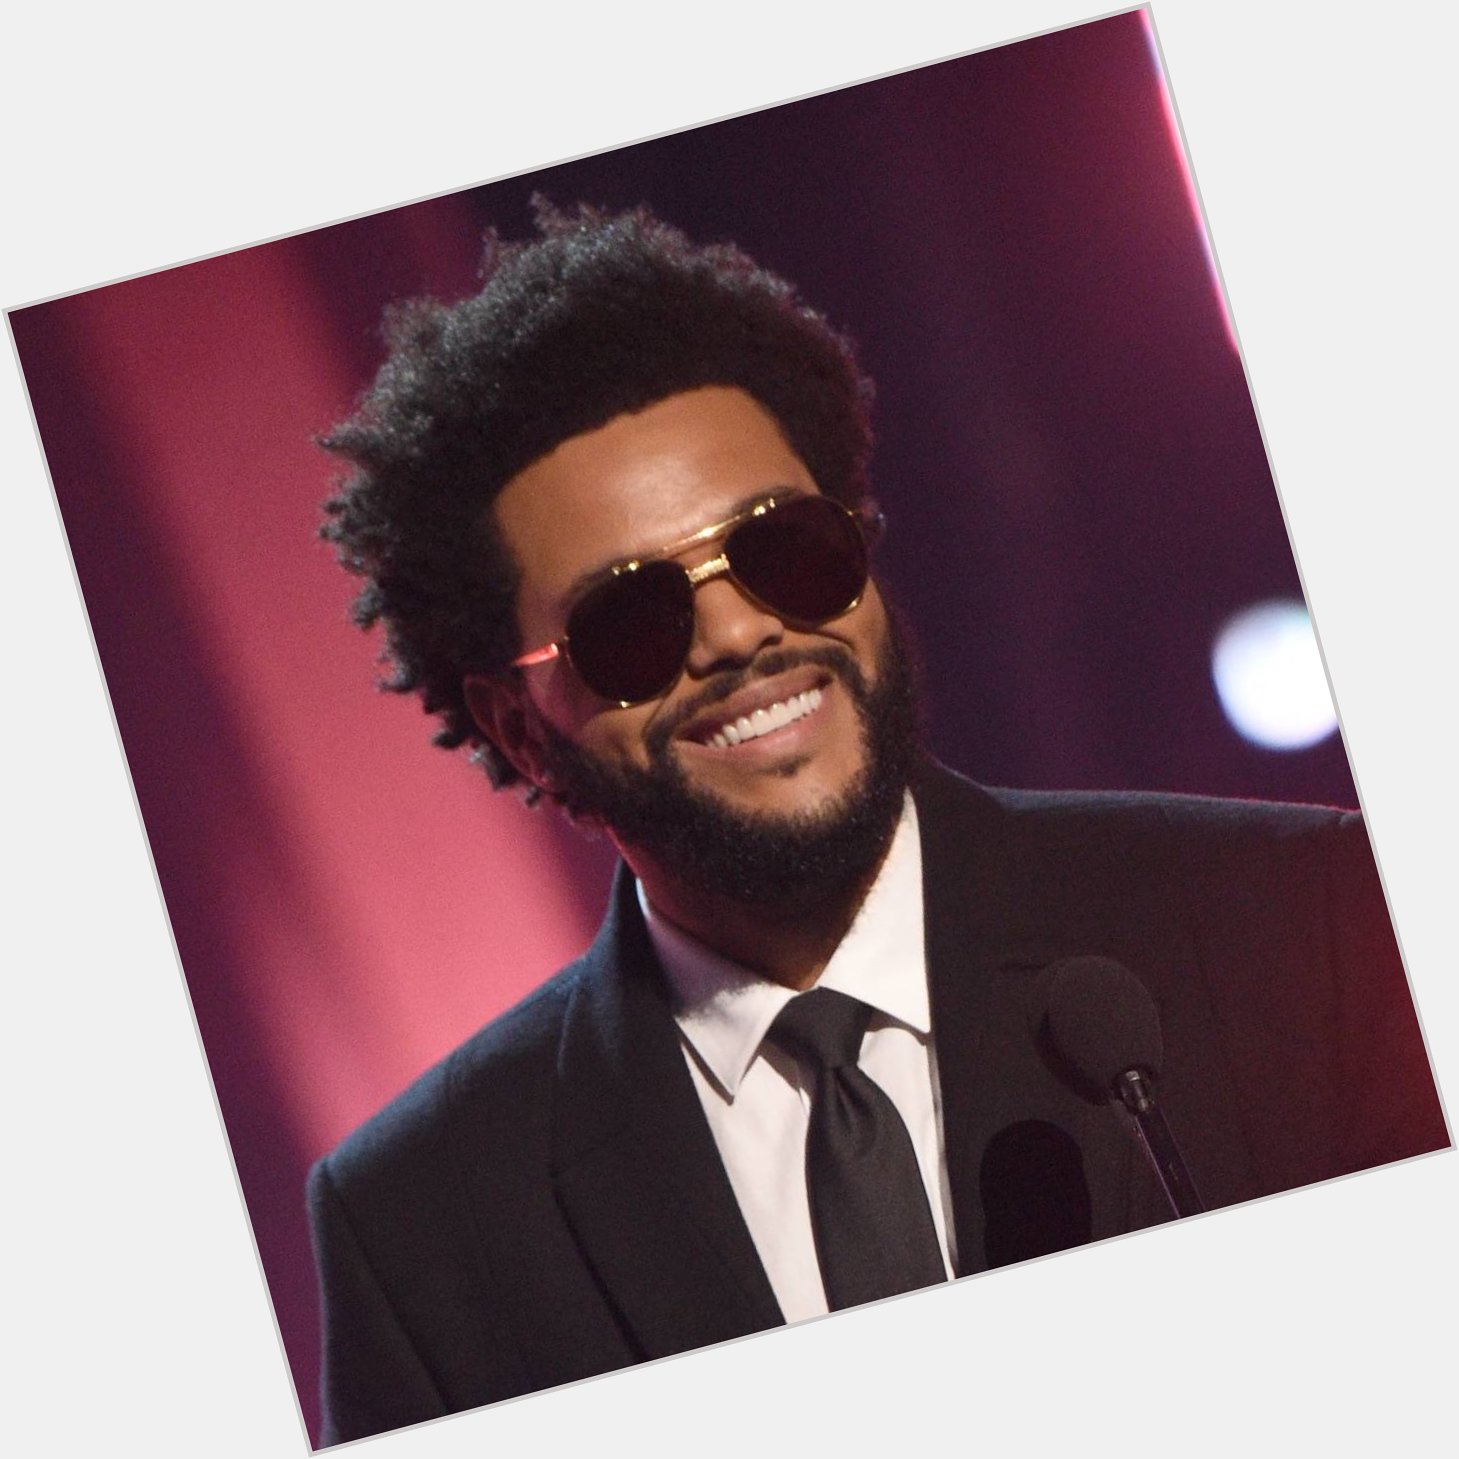 Happy Birthday to The Weeknd. One of the greatest musicians of the generation, Whats ur fav song by him ? 